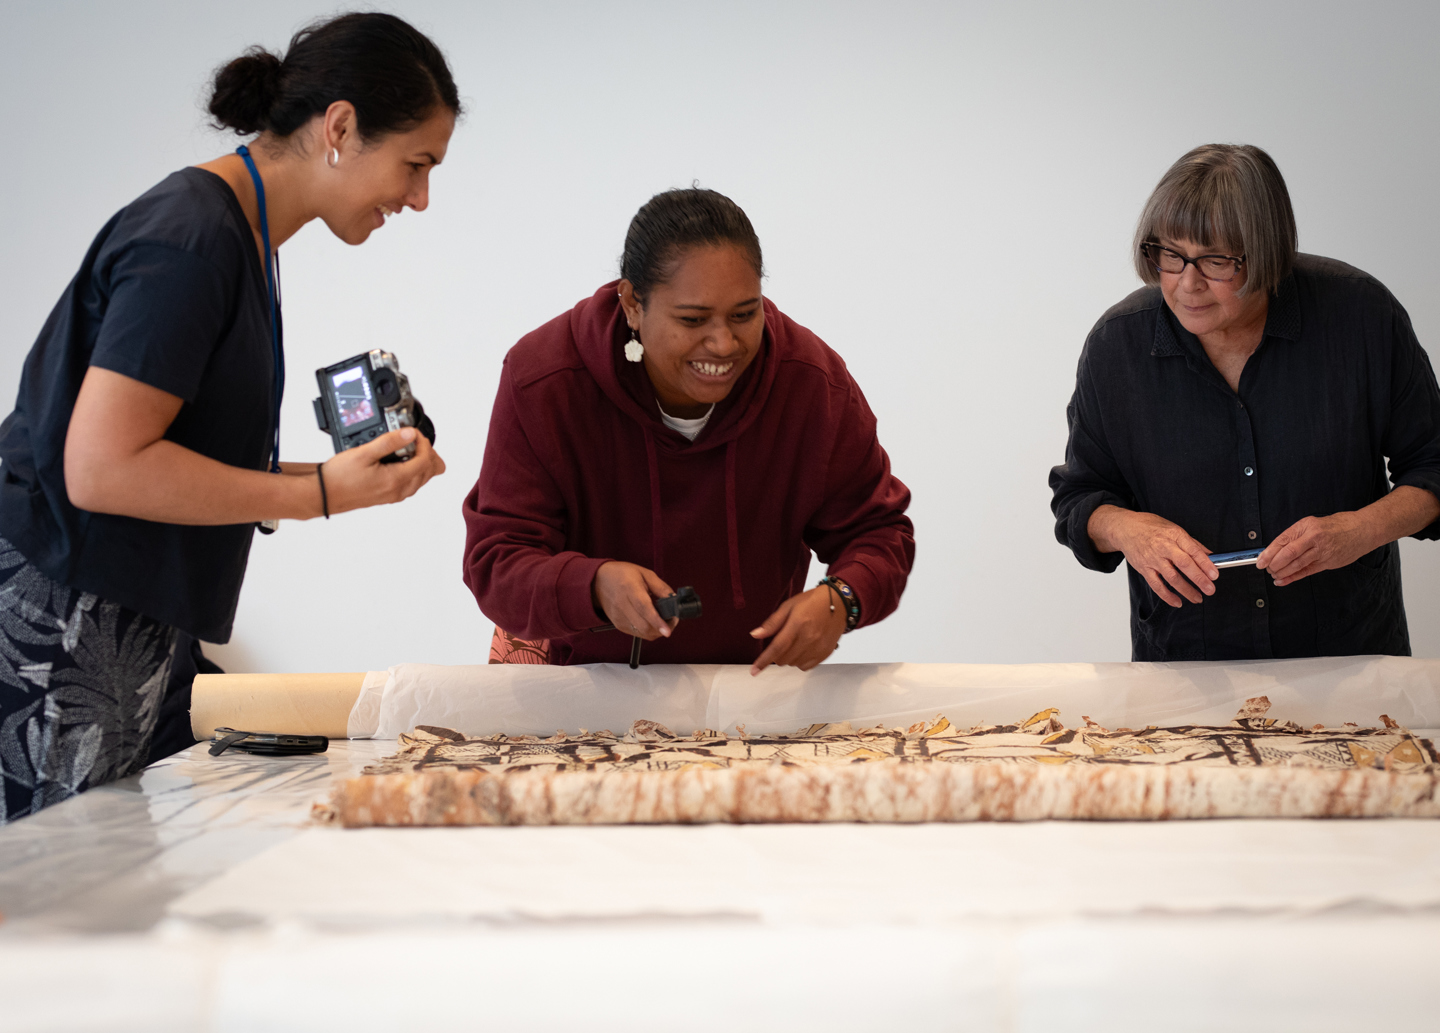 Pasifika artists working on a Ngatu - tapa cloth - at the Govett-Brewster Art Gallery as part of the Koloa artist residency.